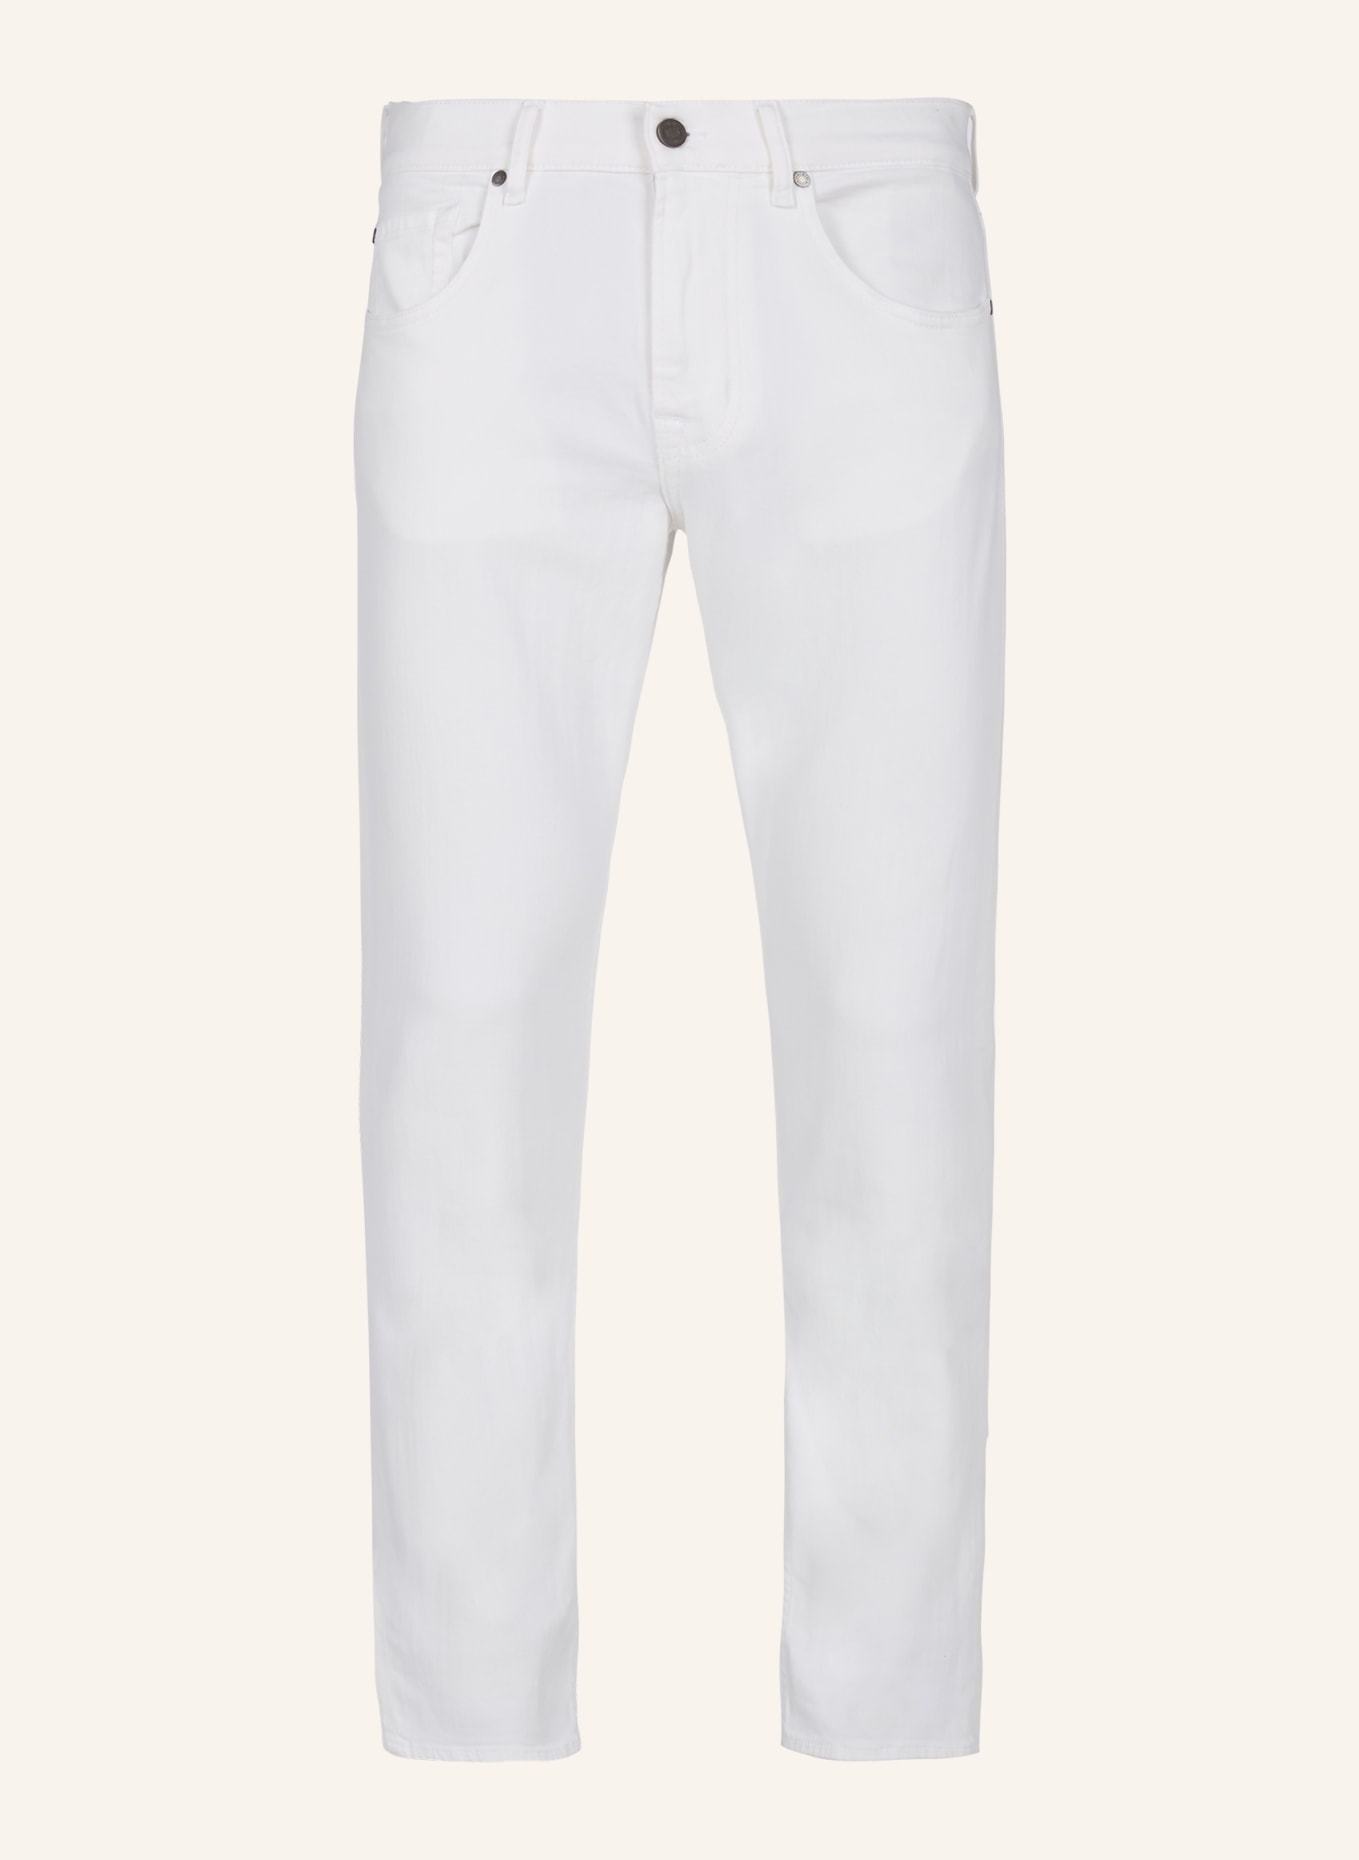 7 for all mankind Jeans SLIMMY Slim fit, Farbe: WEISS (Bild 1)